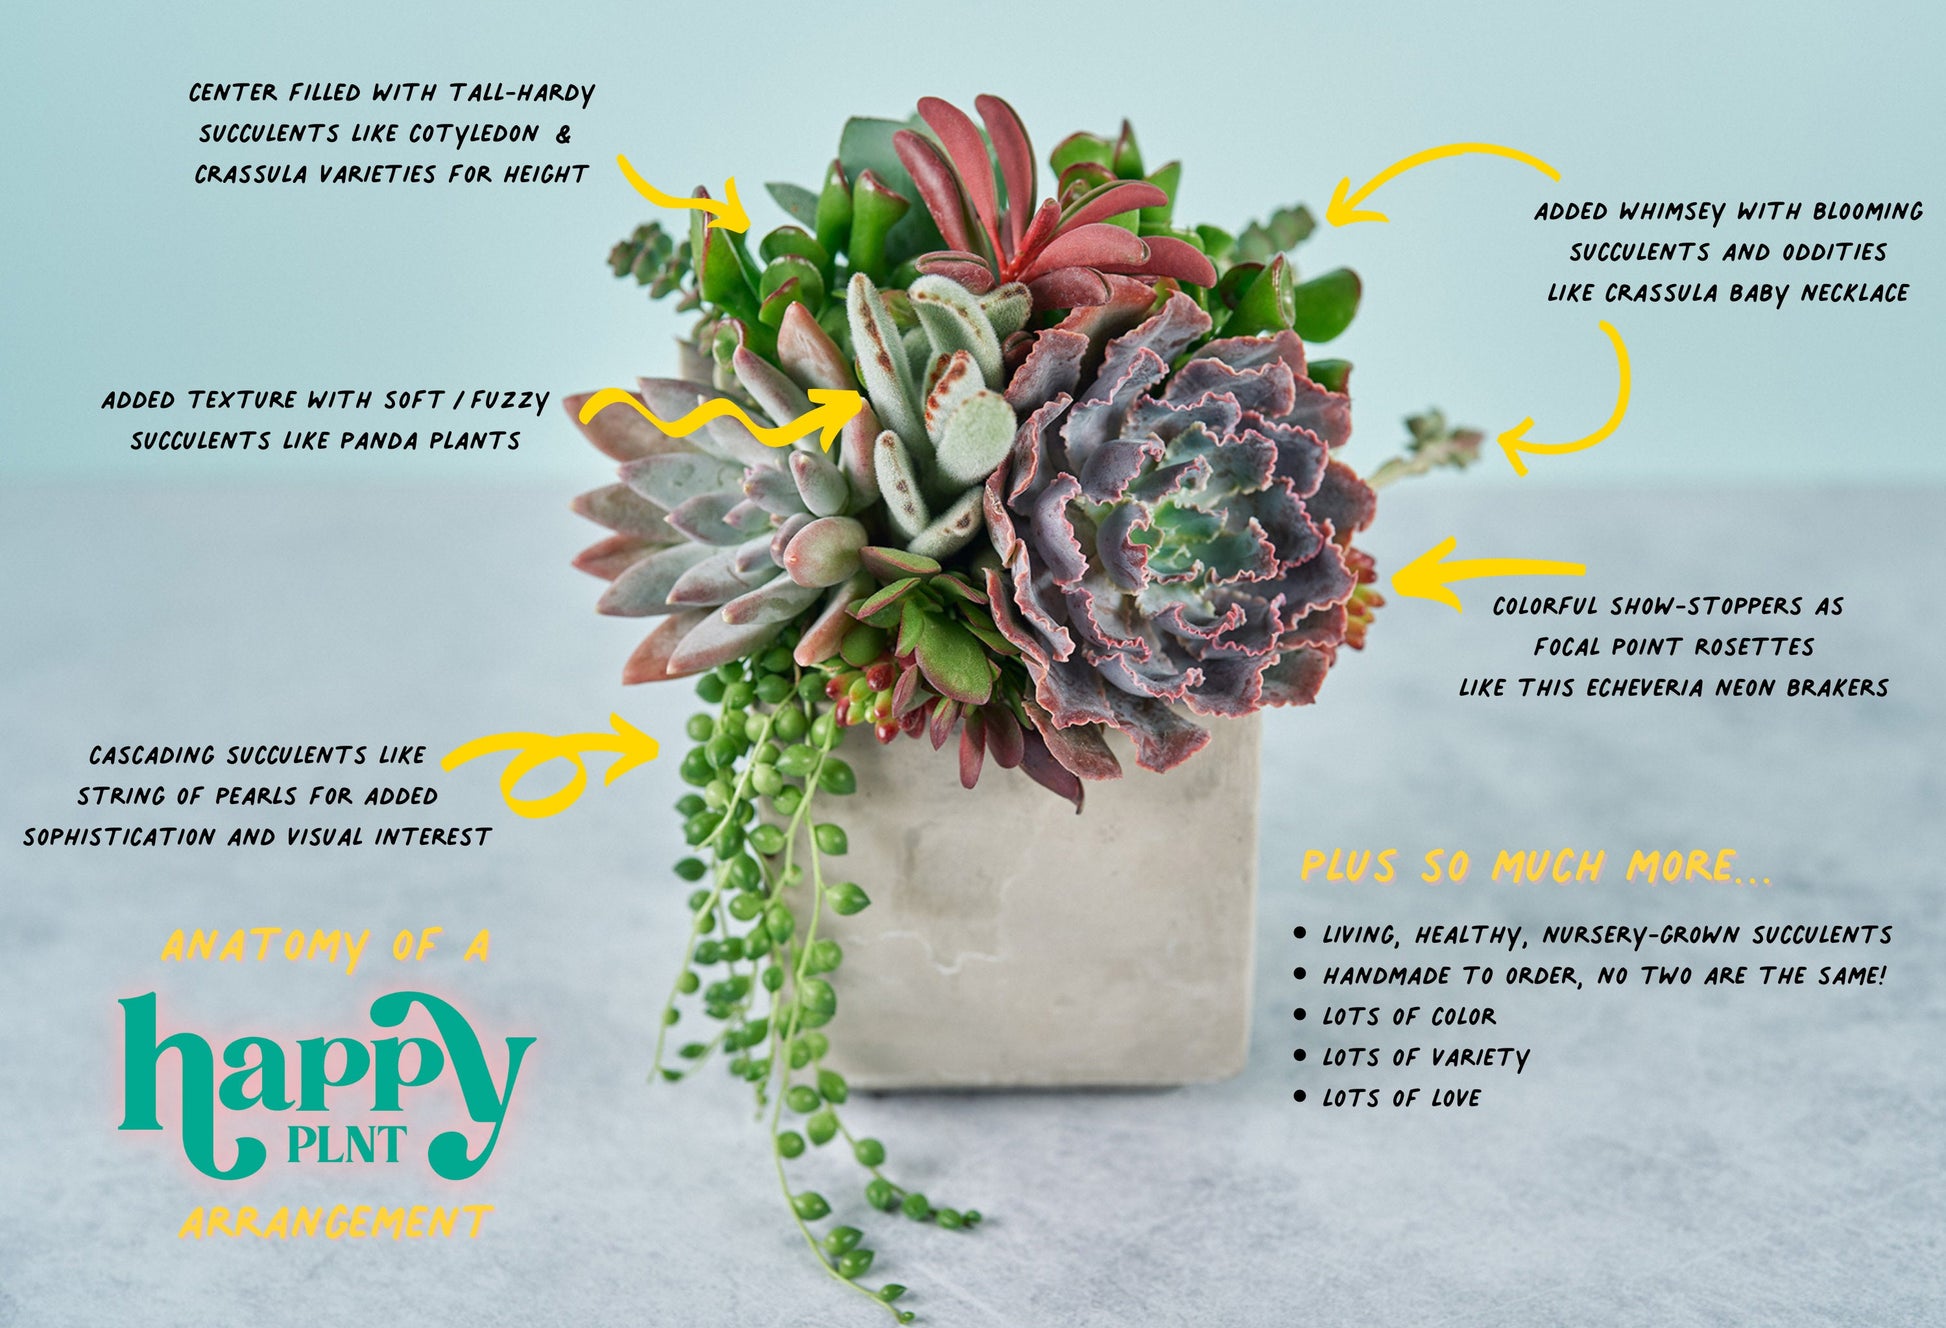 My Universe Living Succulent Arrangement Gift | Birthday, Celebration, House Warming Living Gift for Plant Lovers | Gift for Mom